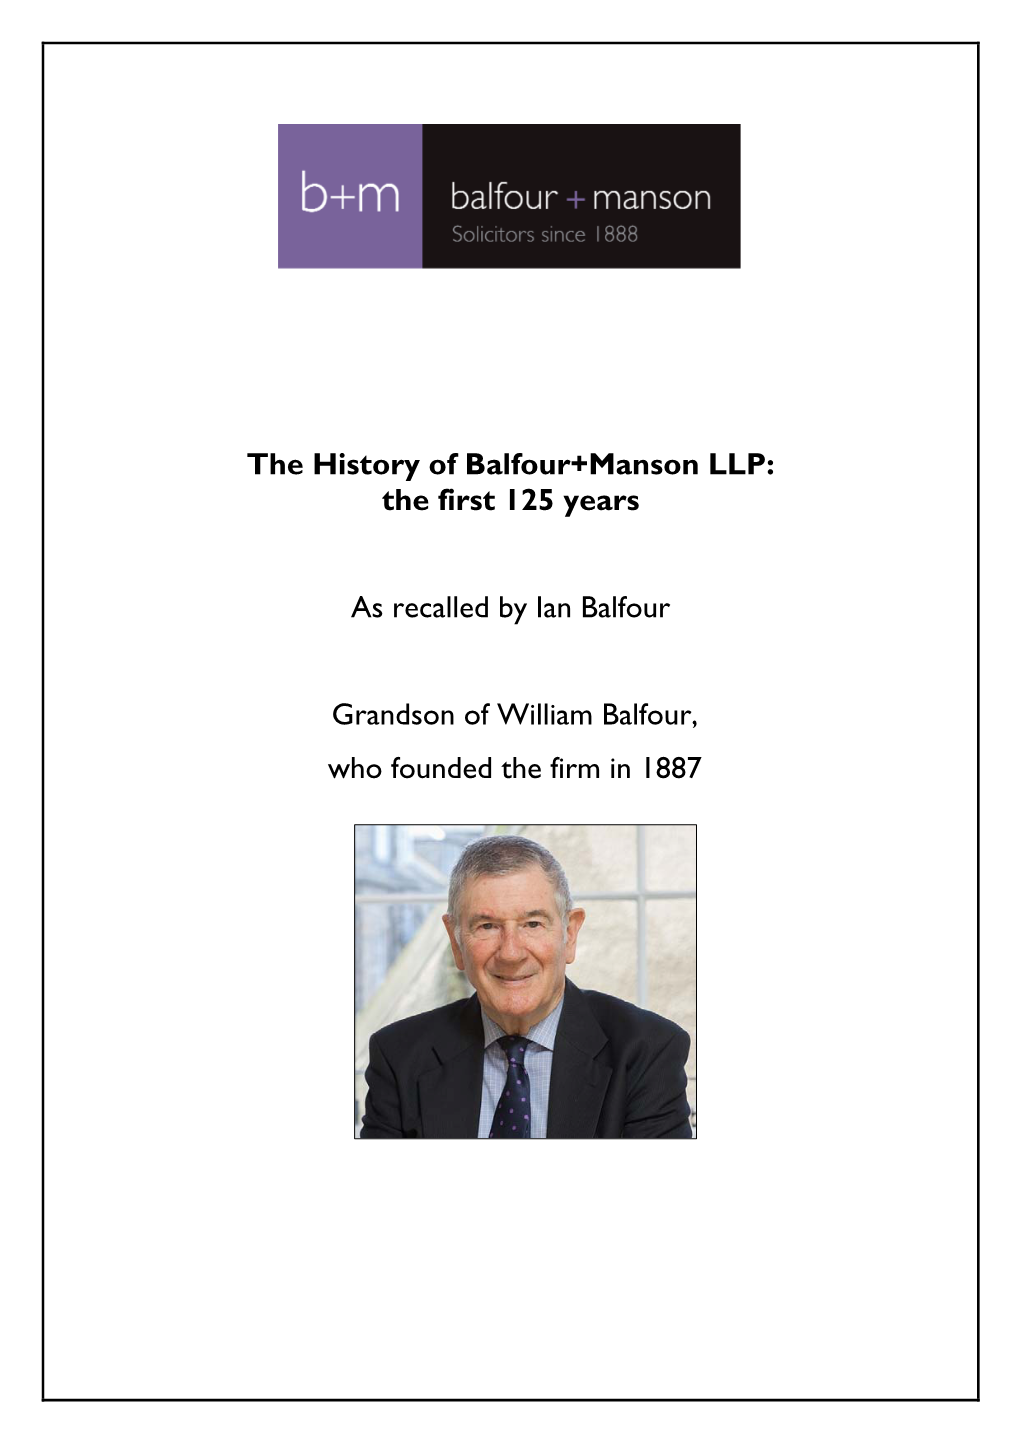 The History of Balfour+Manson LLP: the First 125 Years As Recalled By